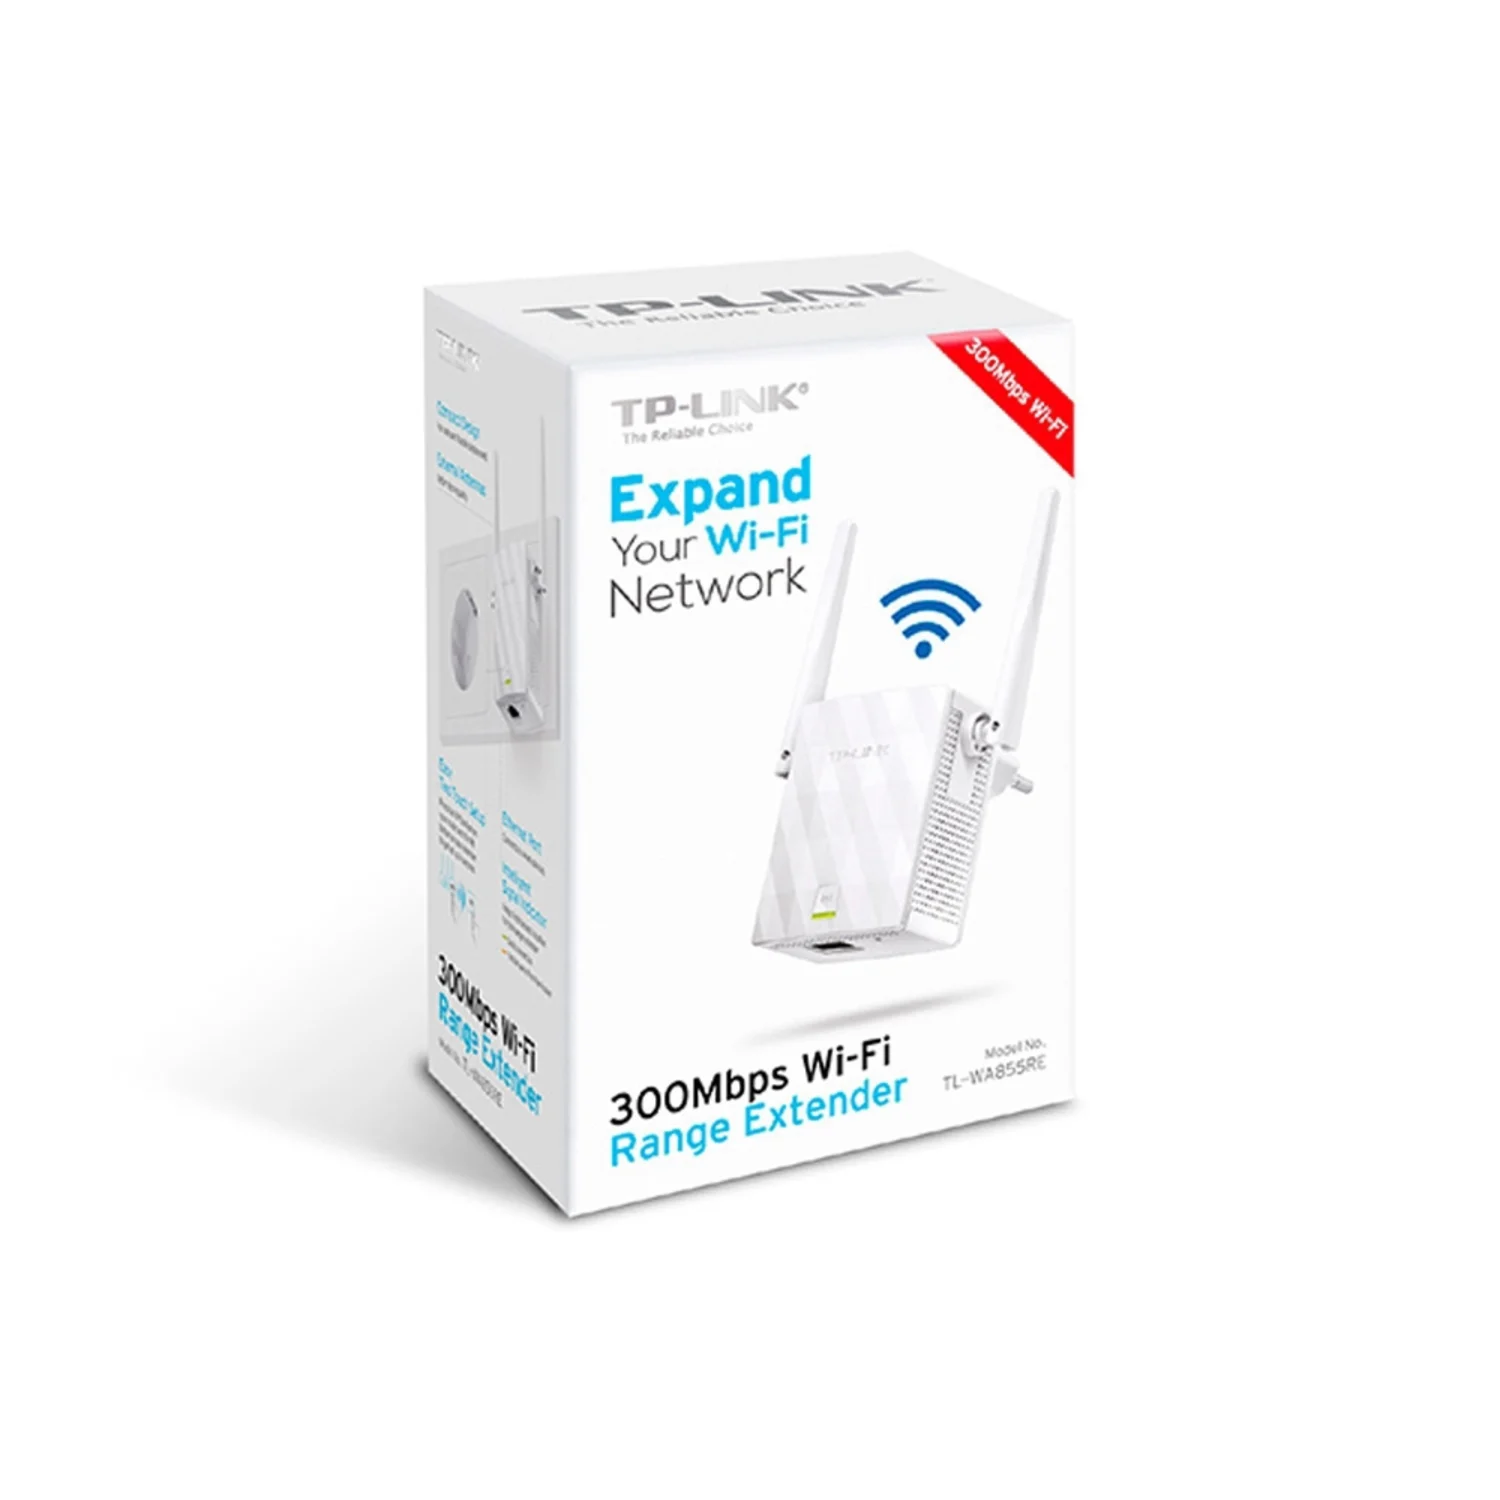 Repetidor WiFi TP-Link TL-WA855RE 300mbps